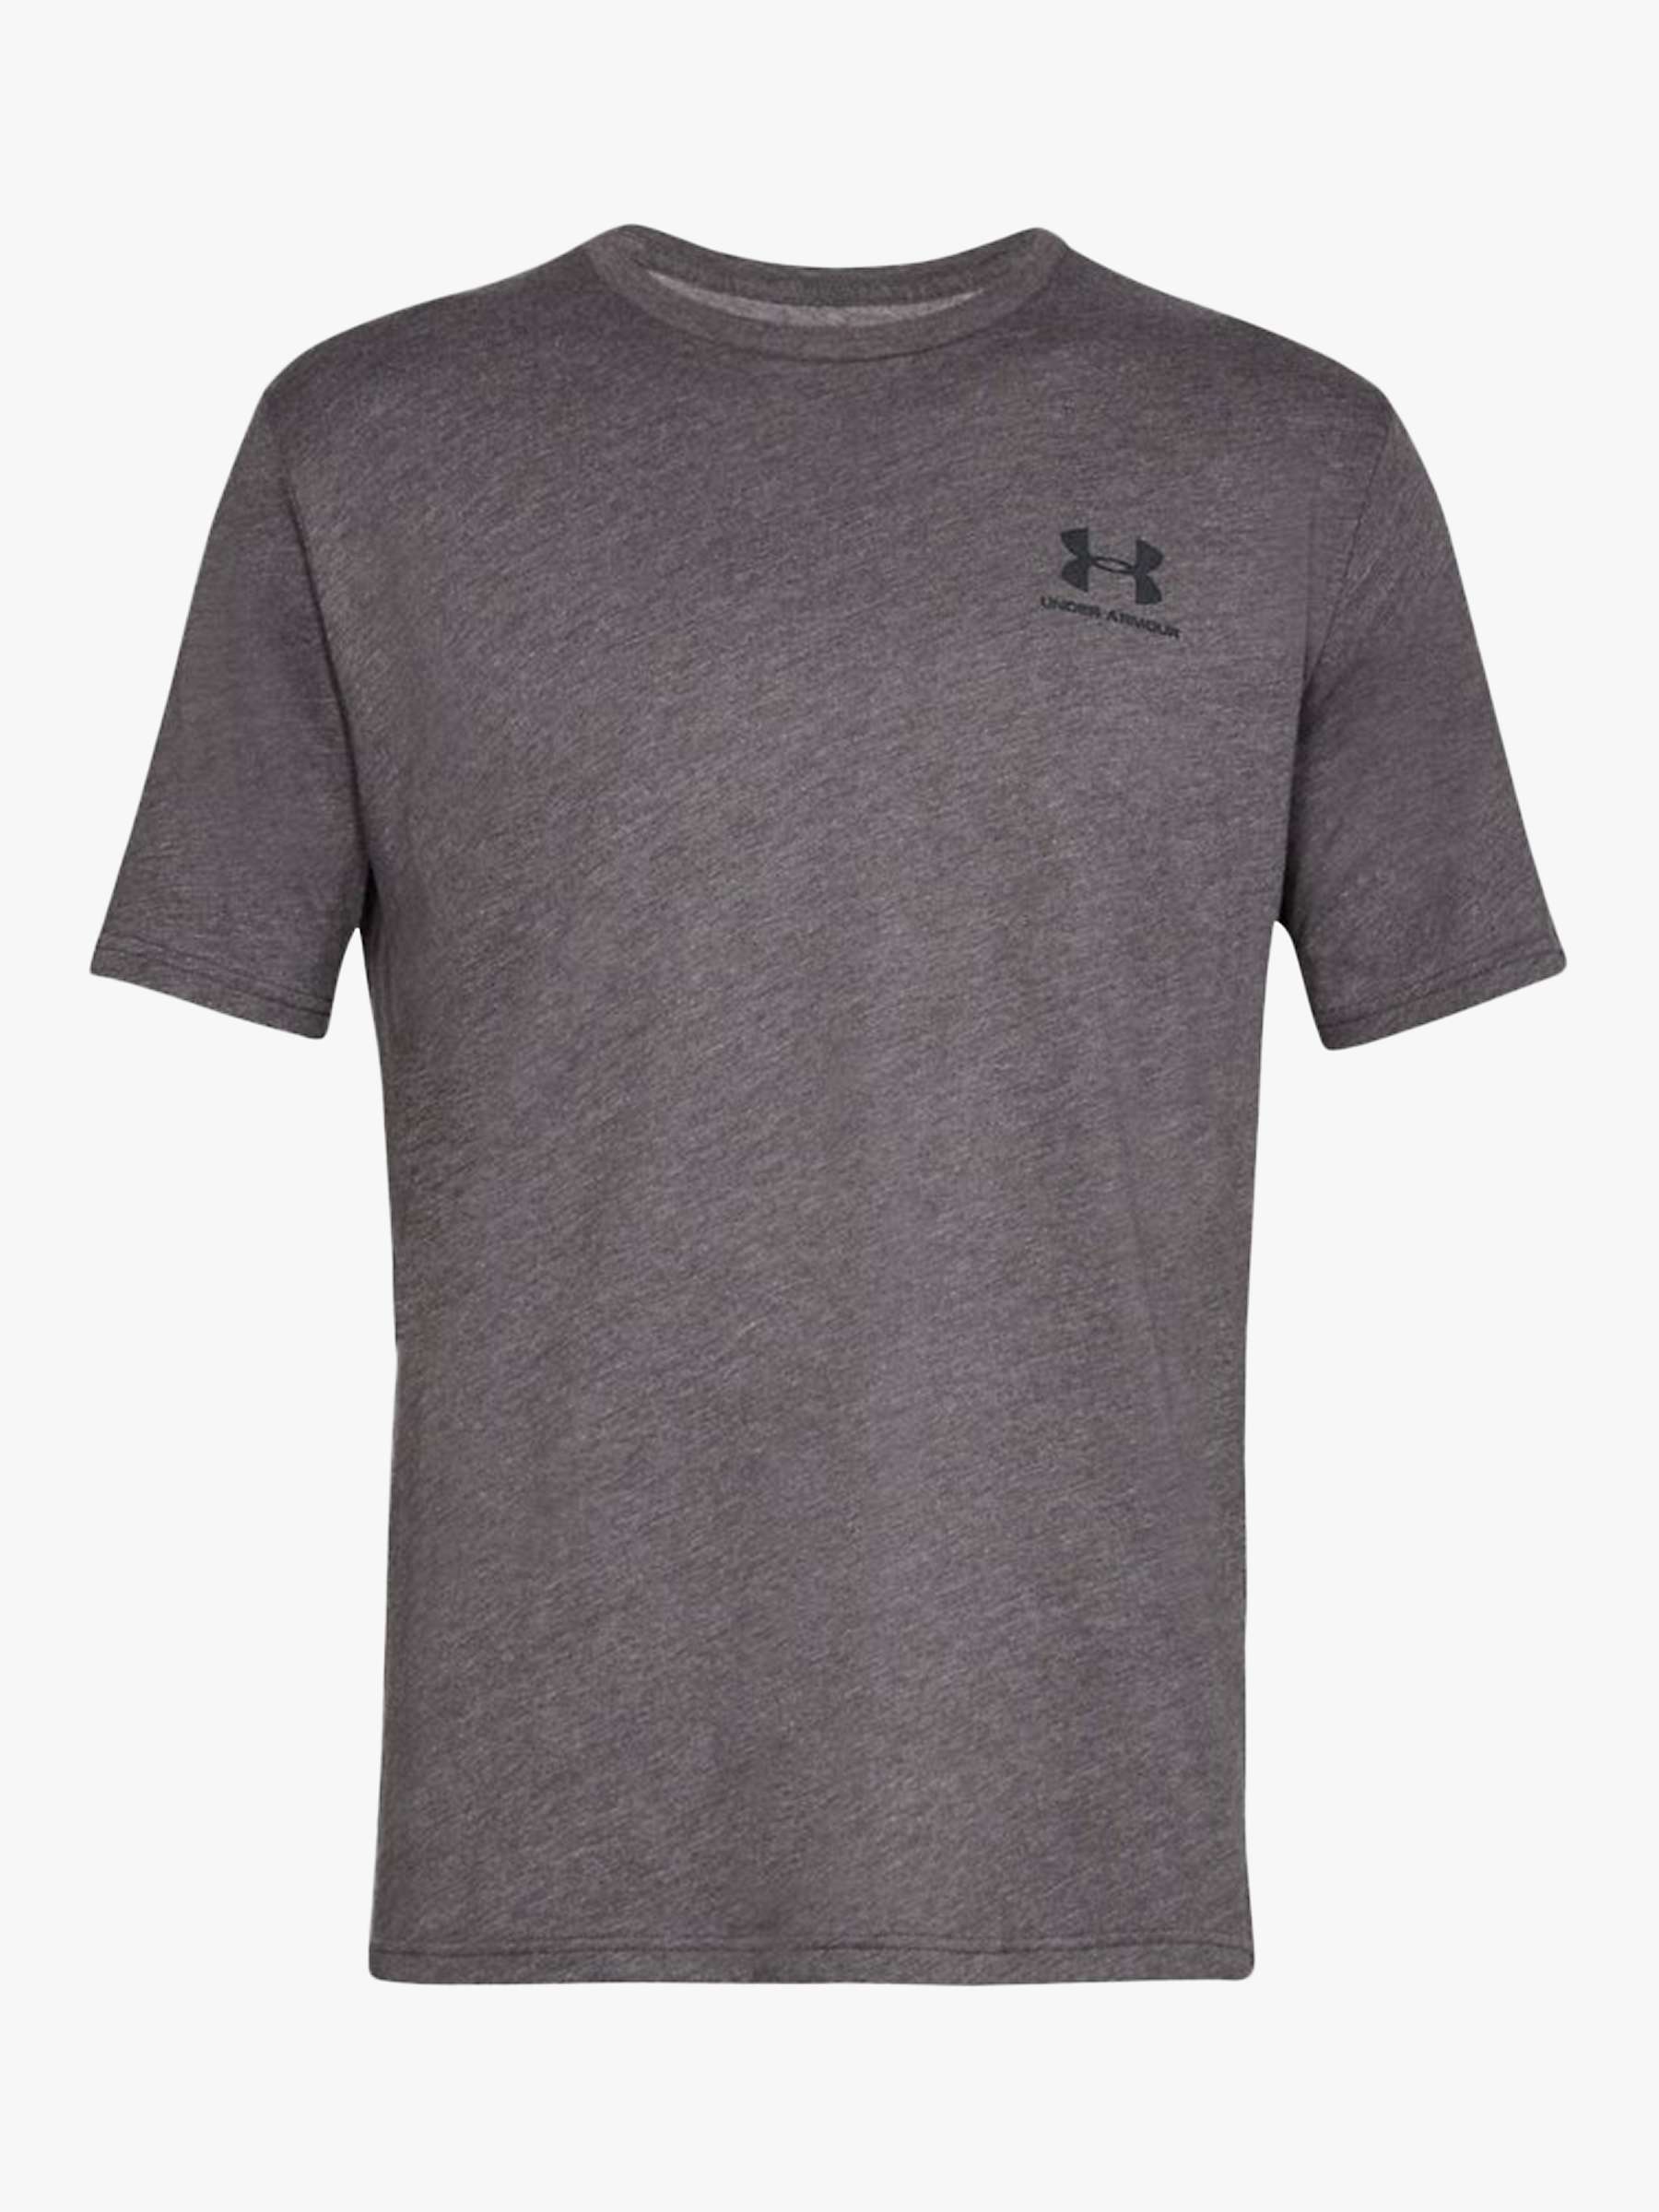 Buy Under Armour Charged Cotton Short Sleeve Training Top, Charcoal Medium Heather/Black Online at johnlewis.com